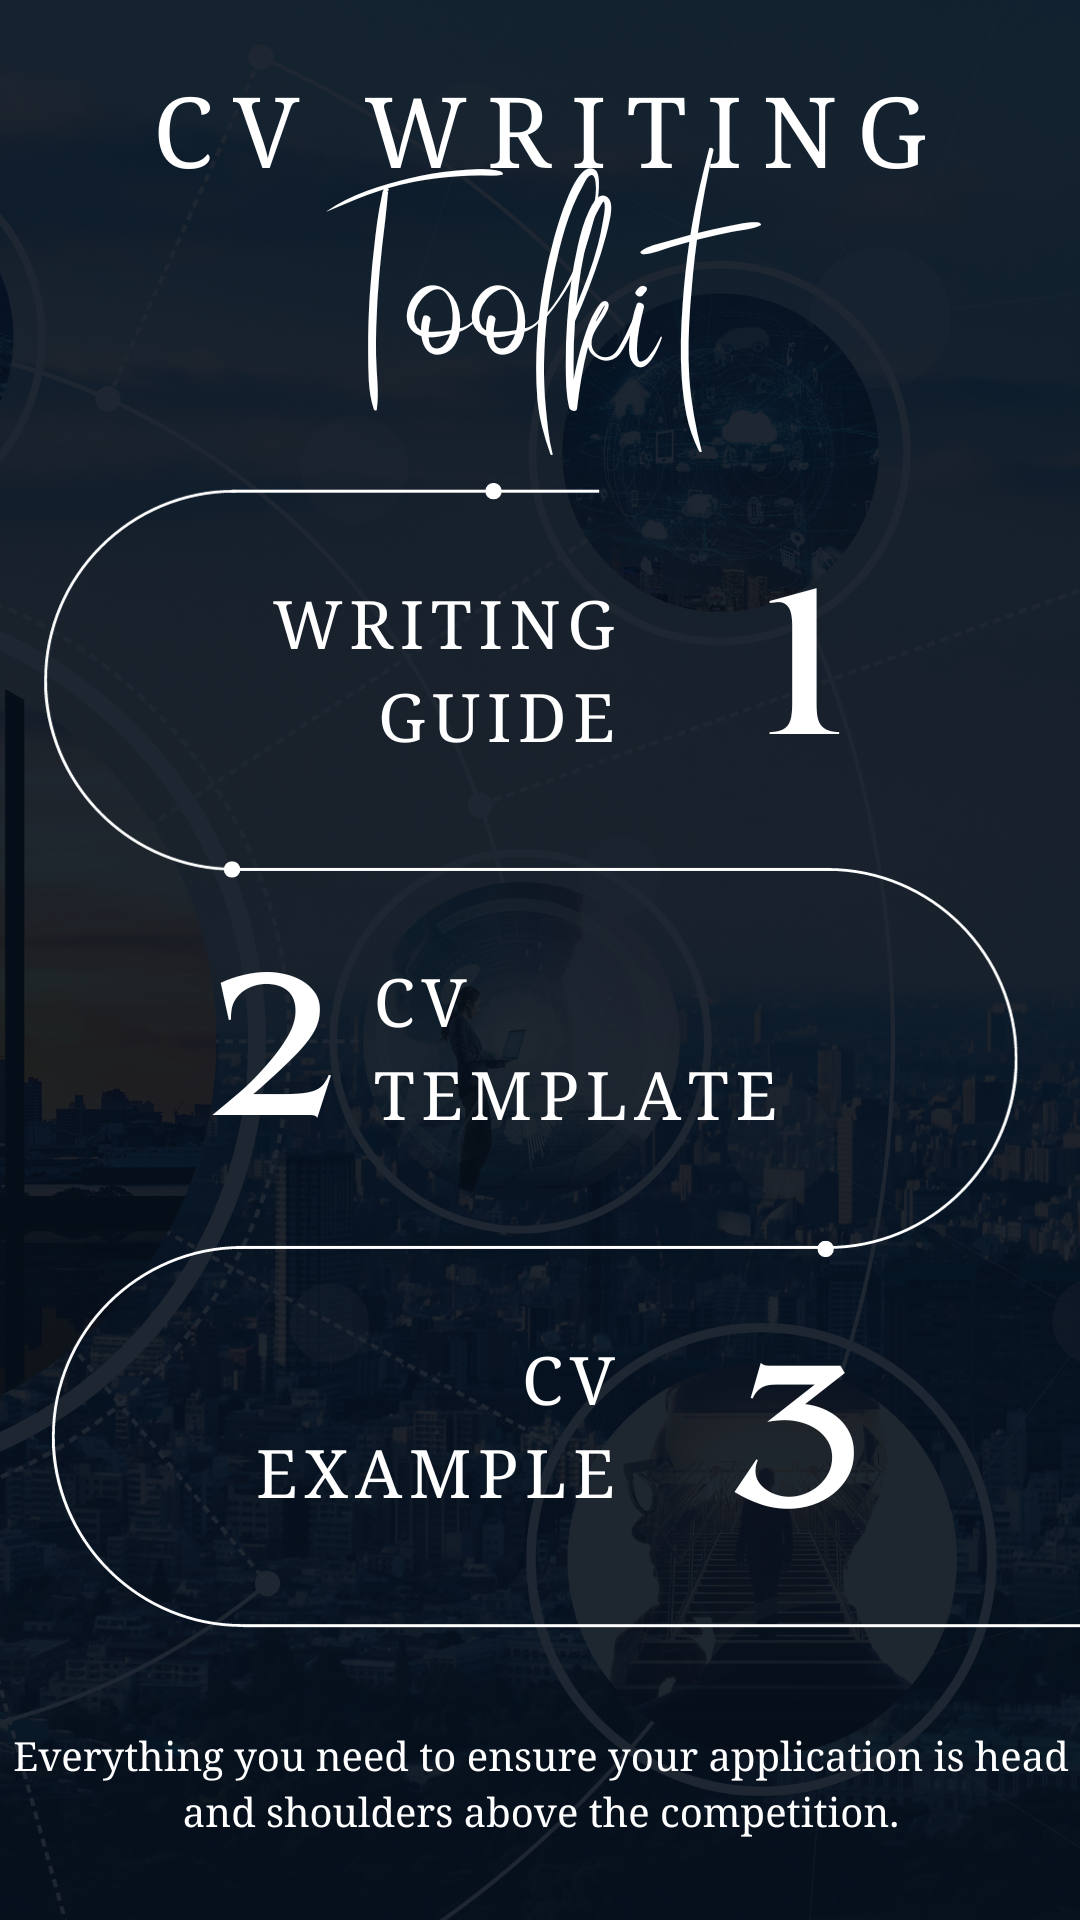 Operations Manager CV Writing Toolkit